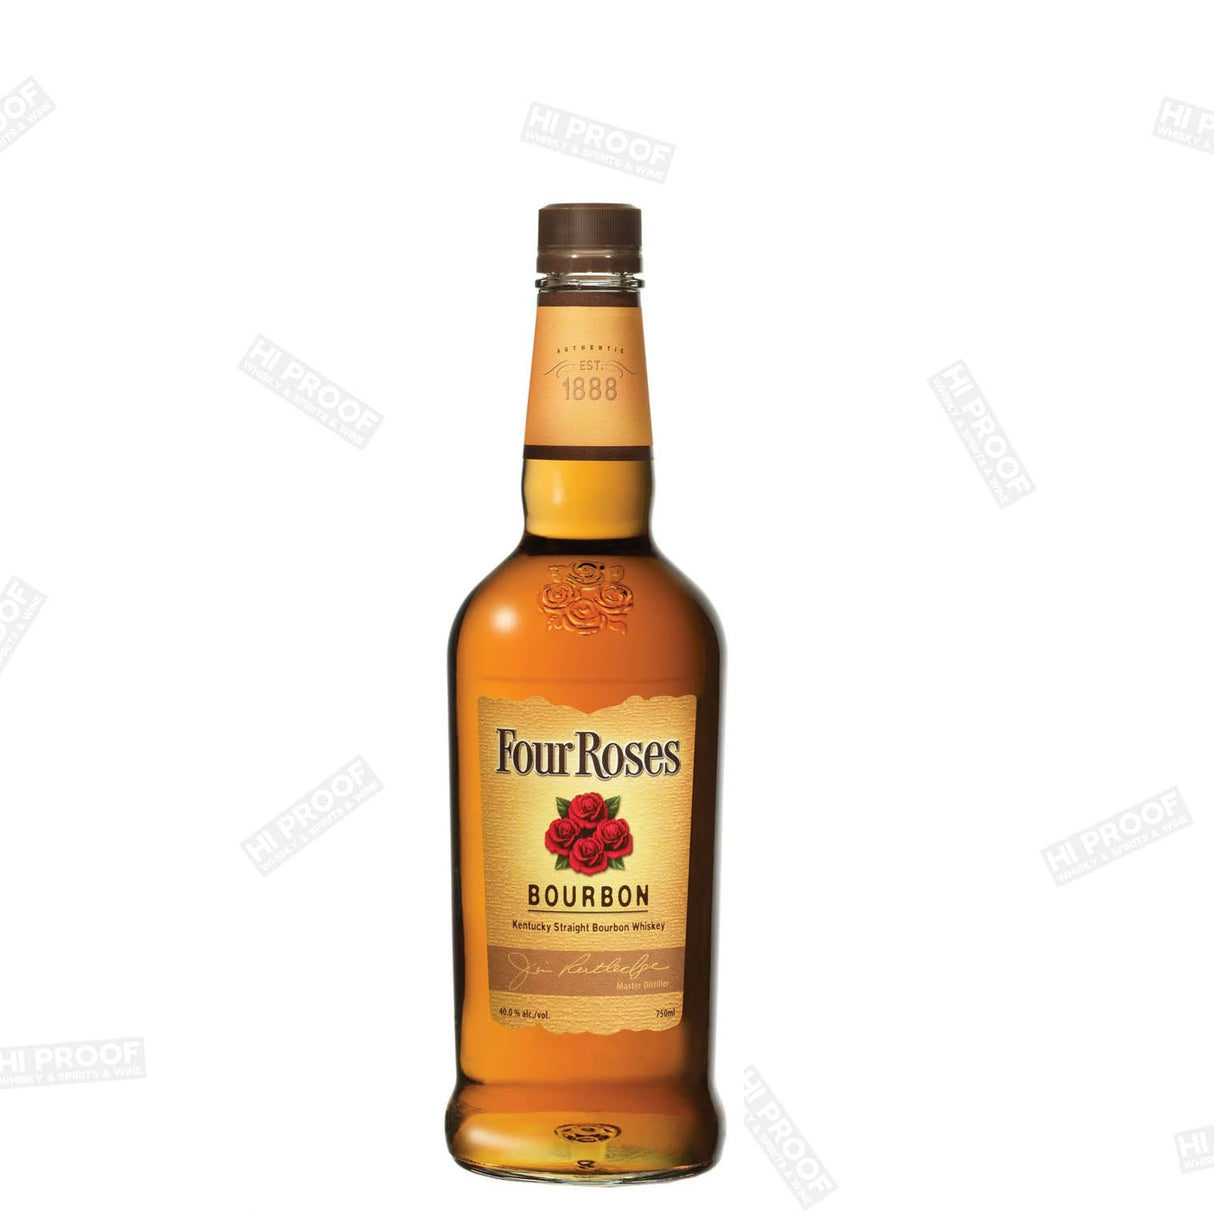 Four Roses Yellow Label Kentucky Straight Bourbon - Hi Proof - Four Roses